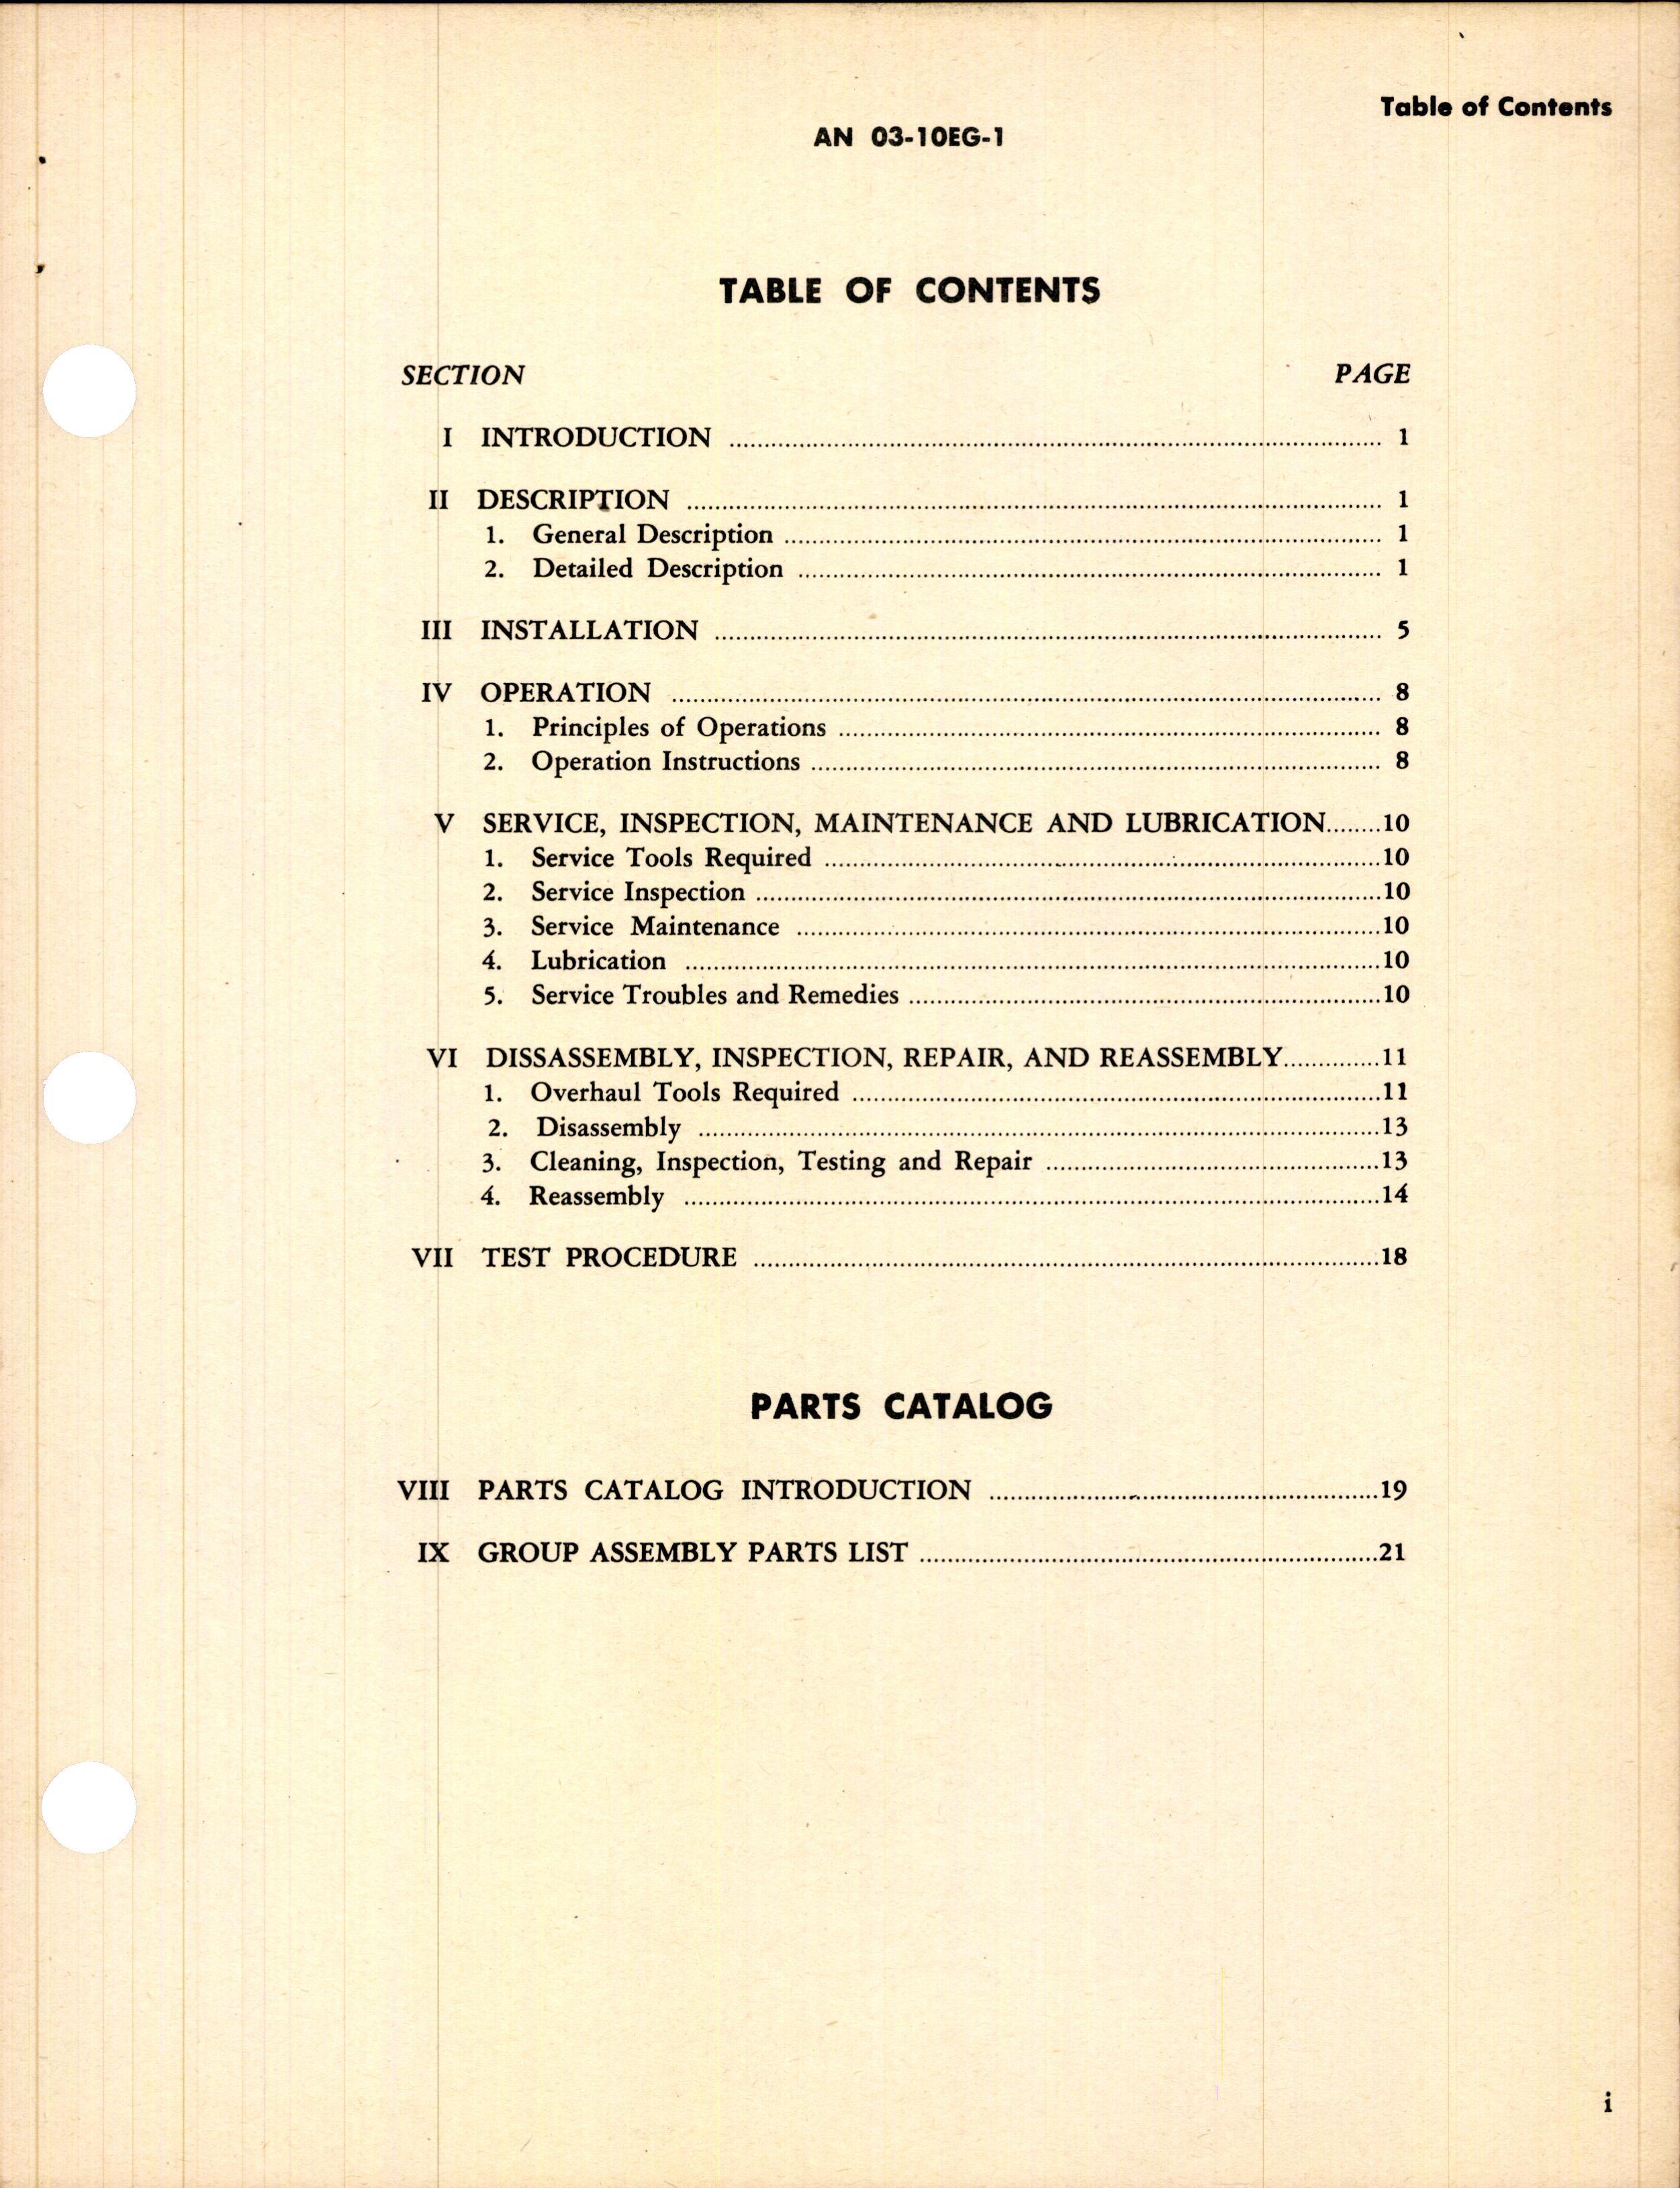 Sample page 3 from AirCorps Library document: Operation, Service, & Overhaul Instructions with Parts Catalog for Engine-Driven Fuel Pump Type AN4101 (G-9)